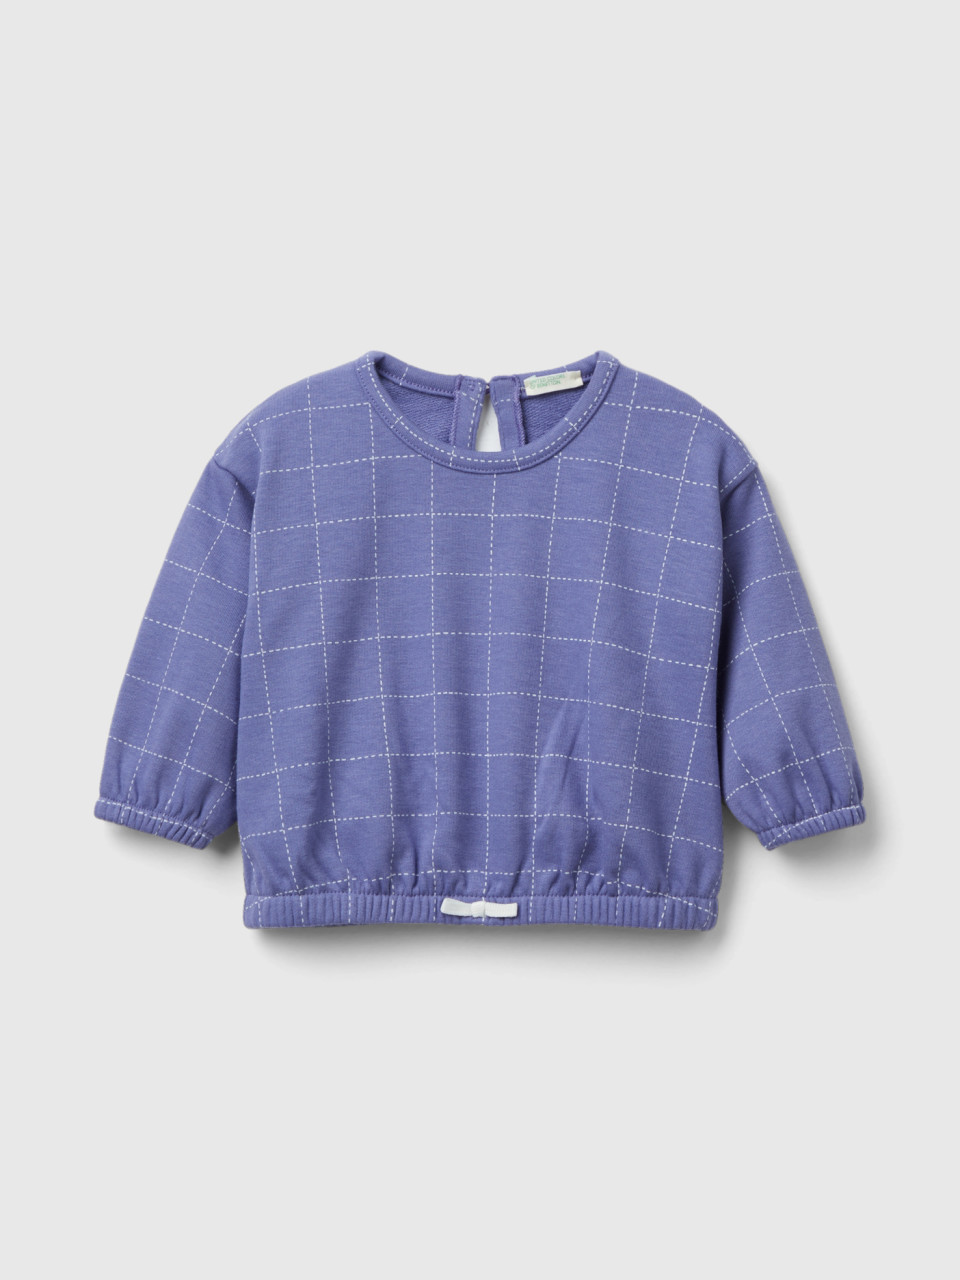 Benetton, Check Sweatshirt With Bow, Violet, Kids